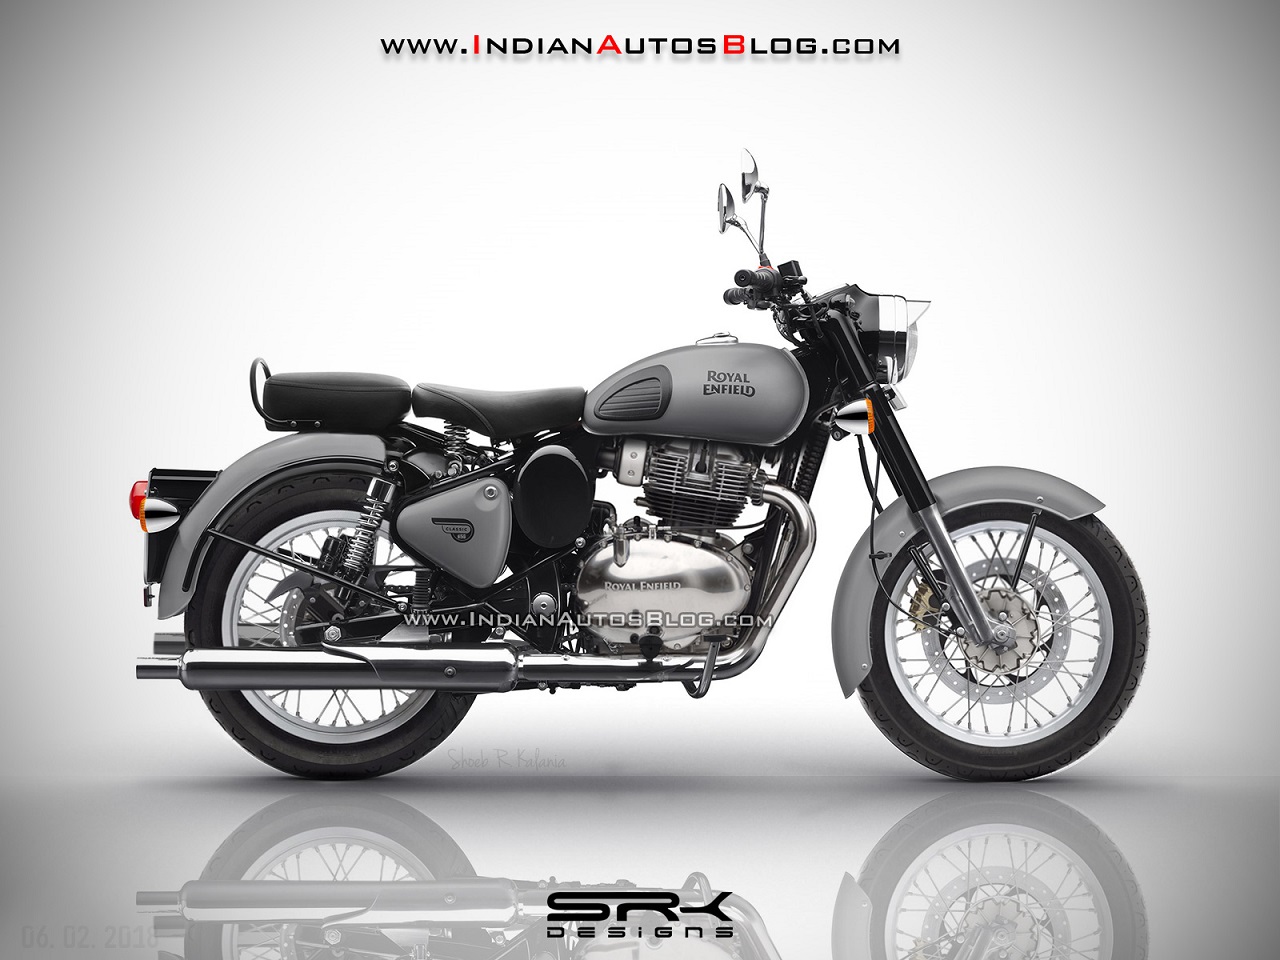 Royal Enfield Classic 650 Twin Cylinder Motorcycle Iab Rendering